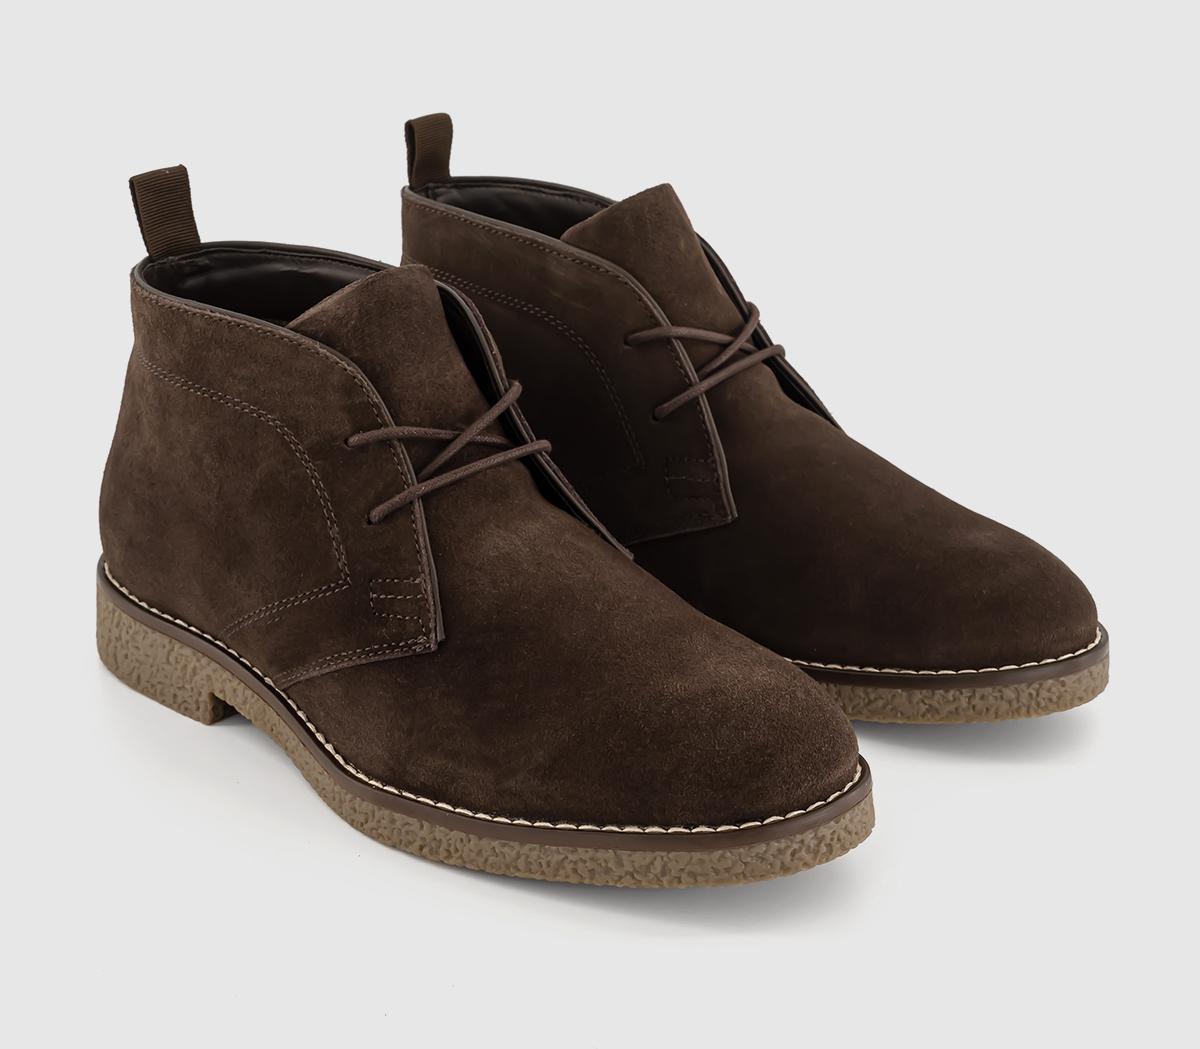 OFFICE Mens Byron Crepe Look Chukka Boots Brown Suede, 11